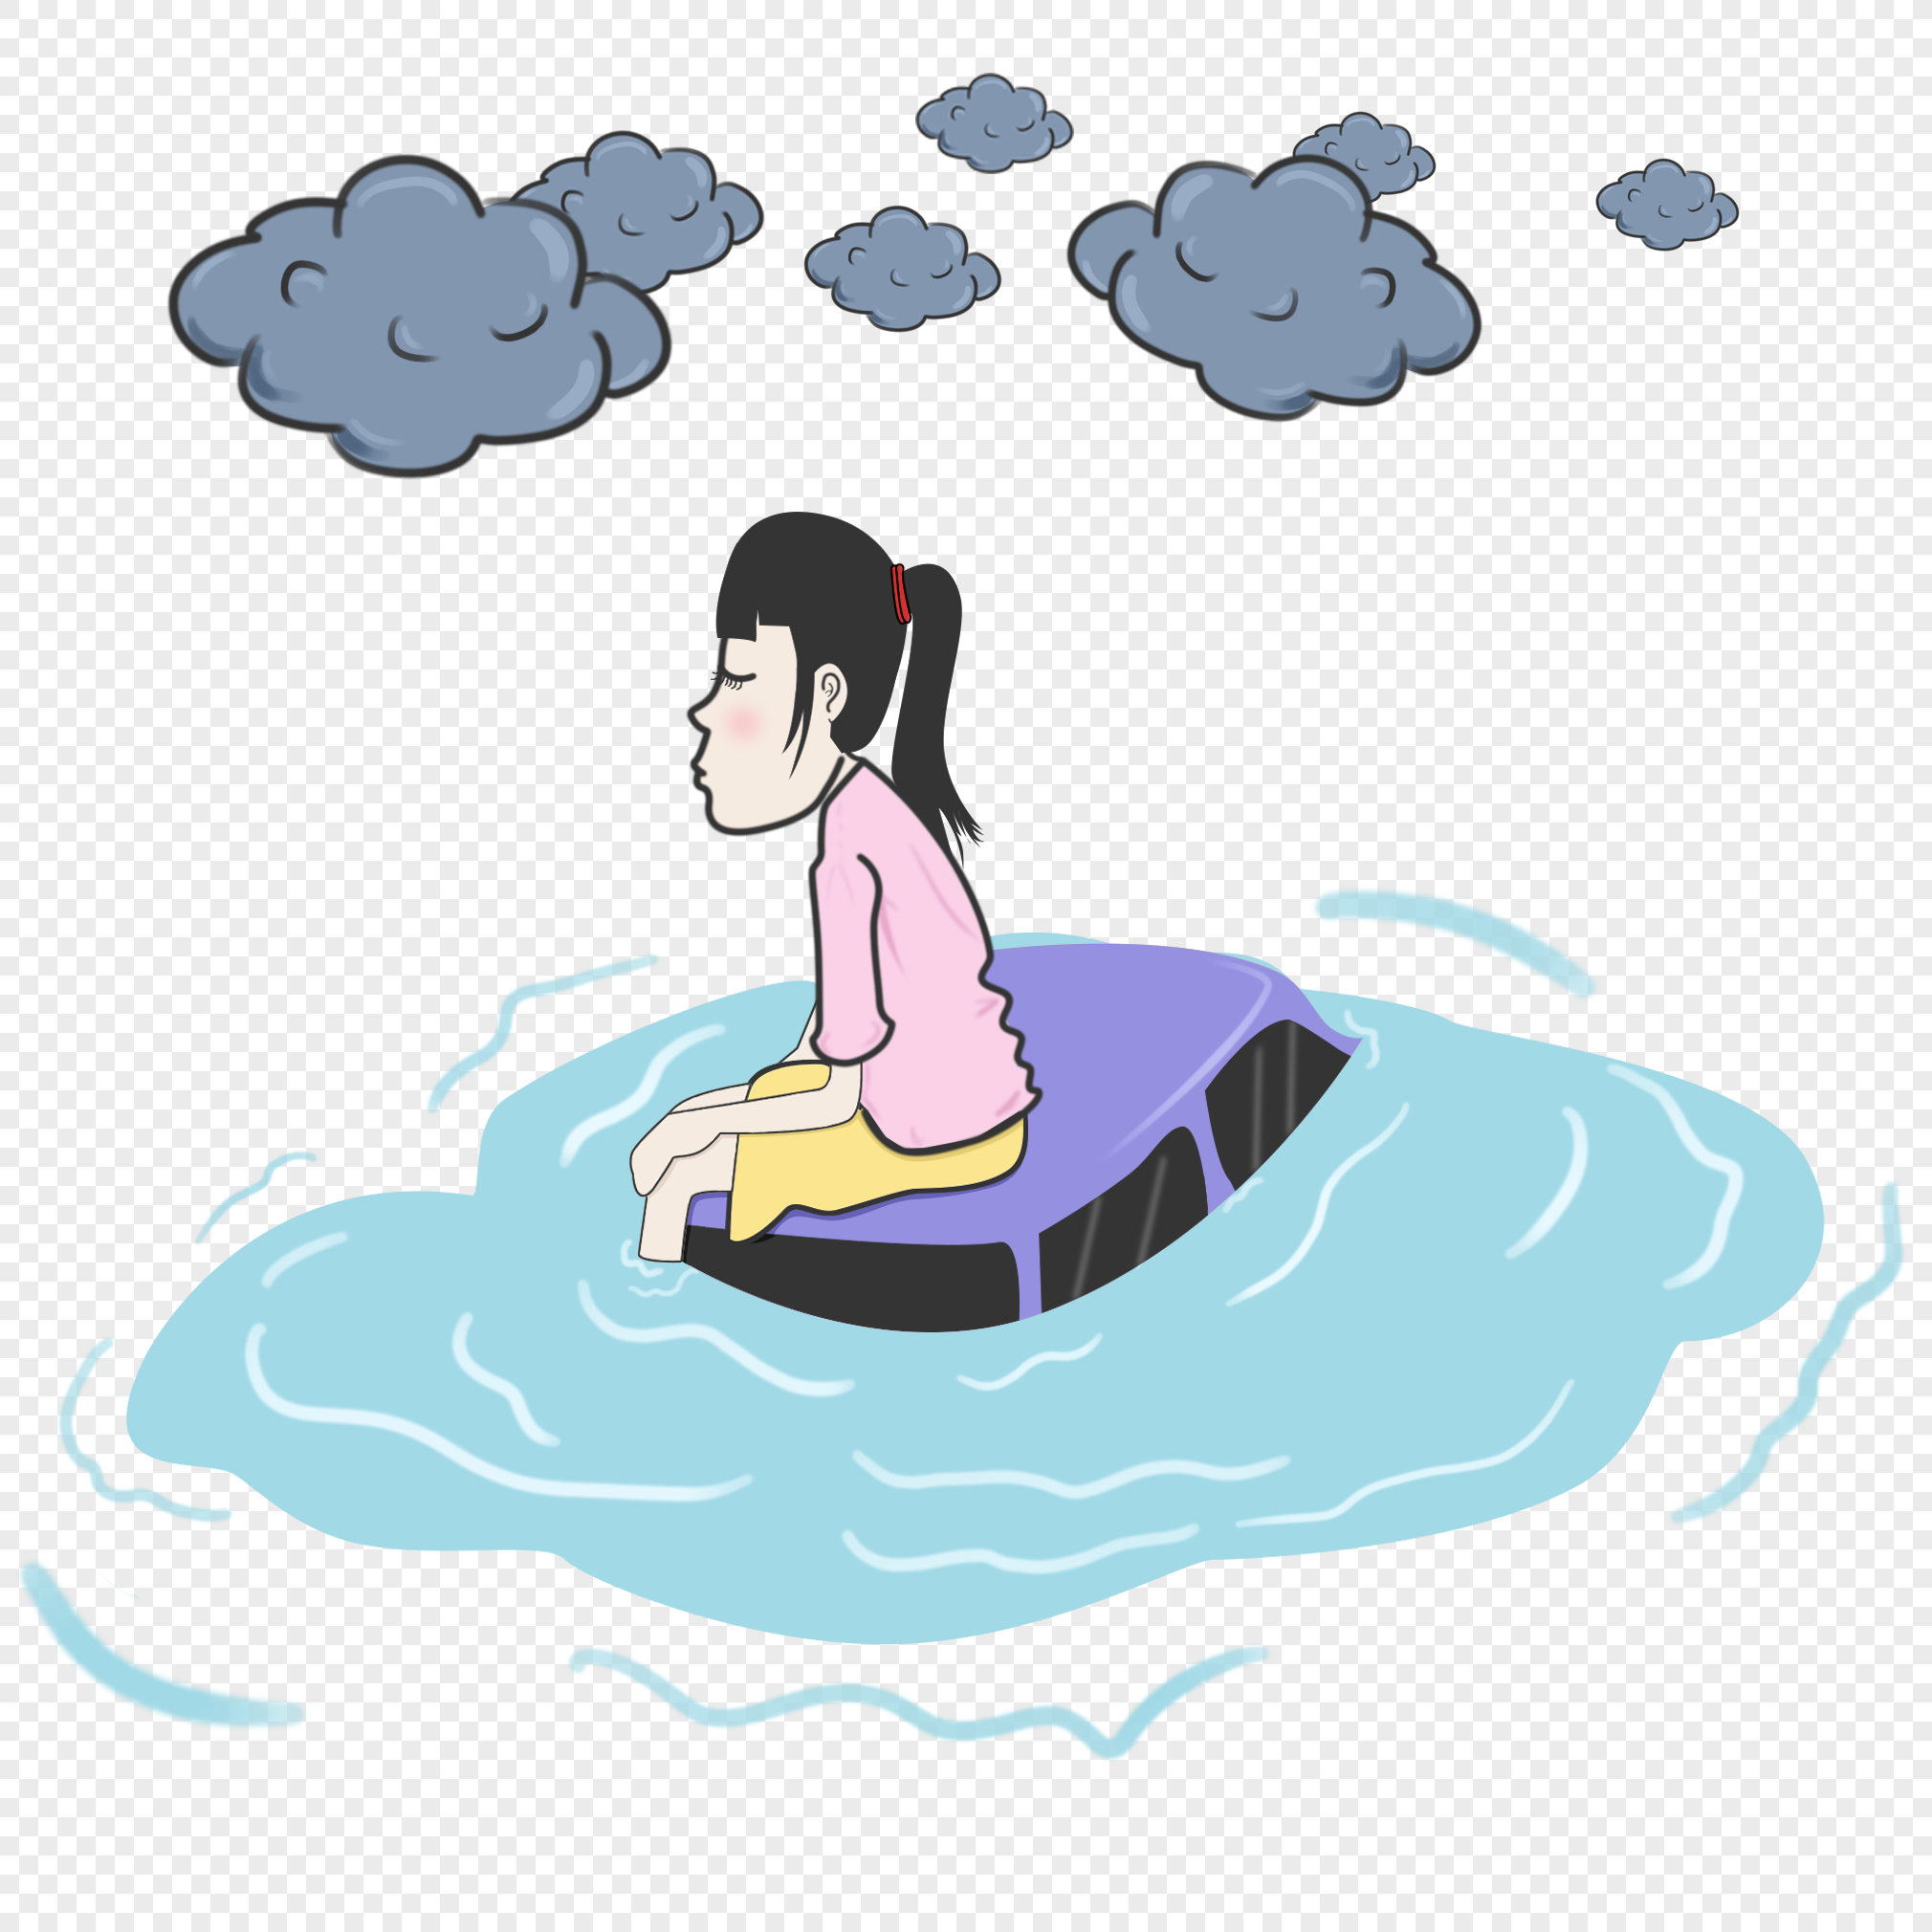 Storm Cartoon PNG Images With Transparent Background | Free Download On ...